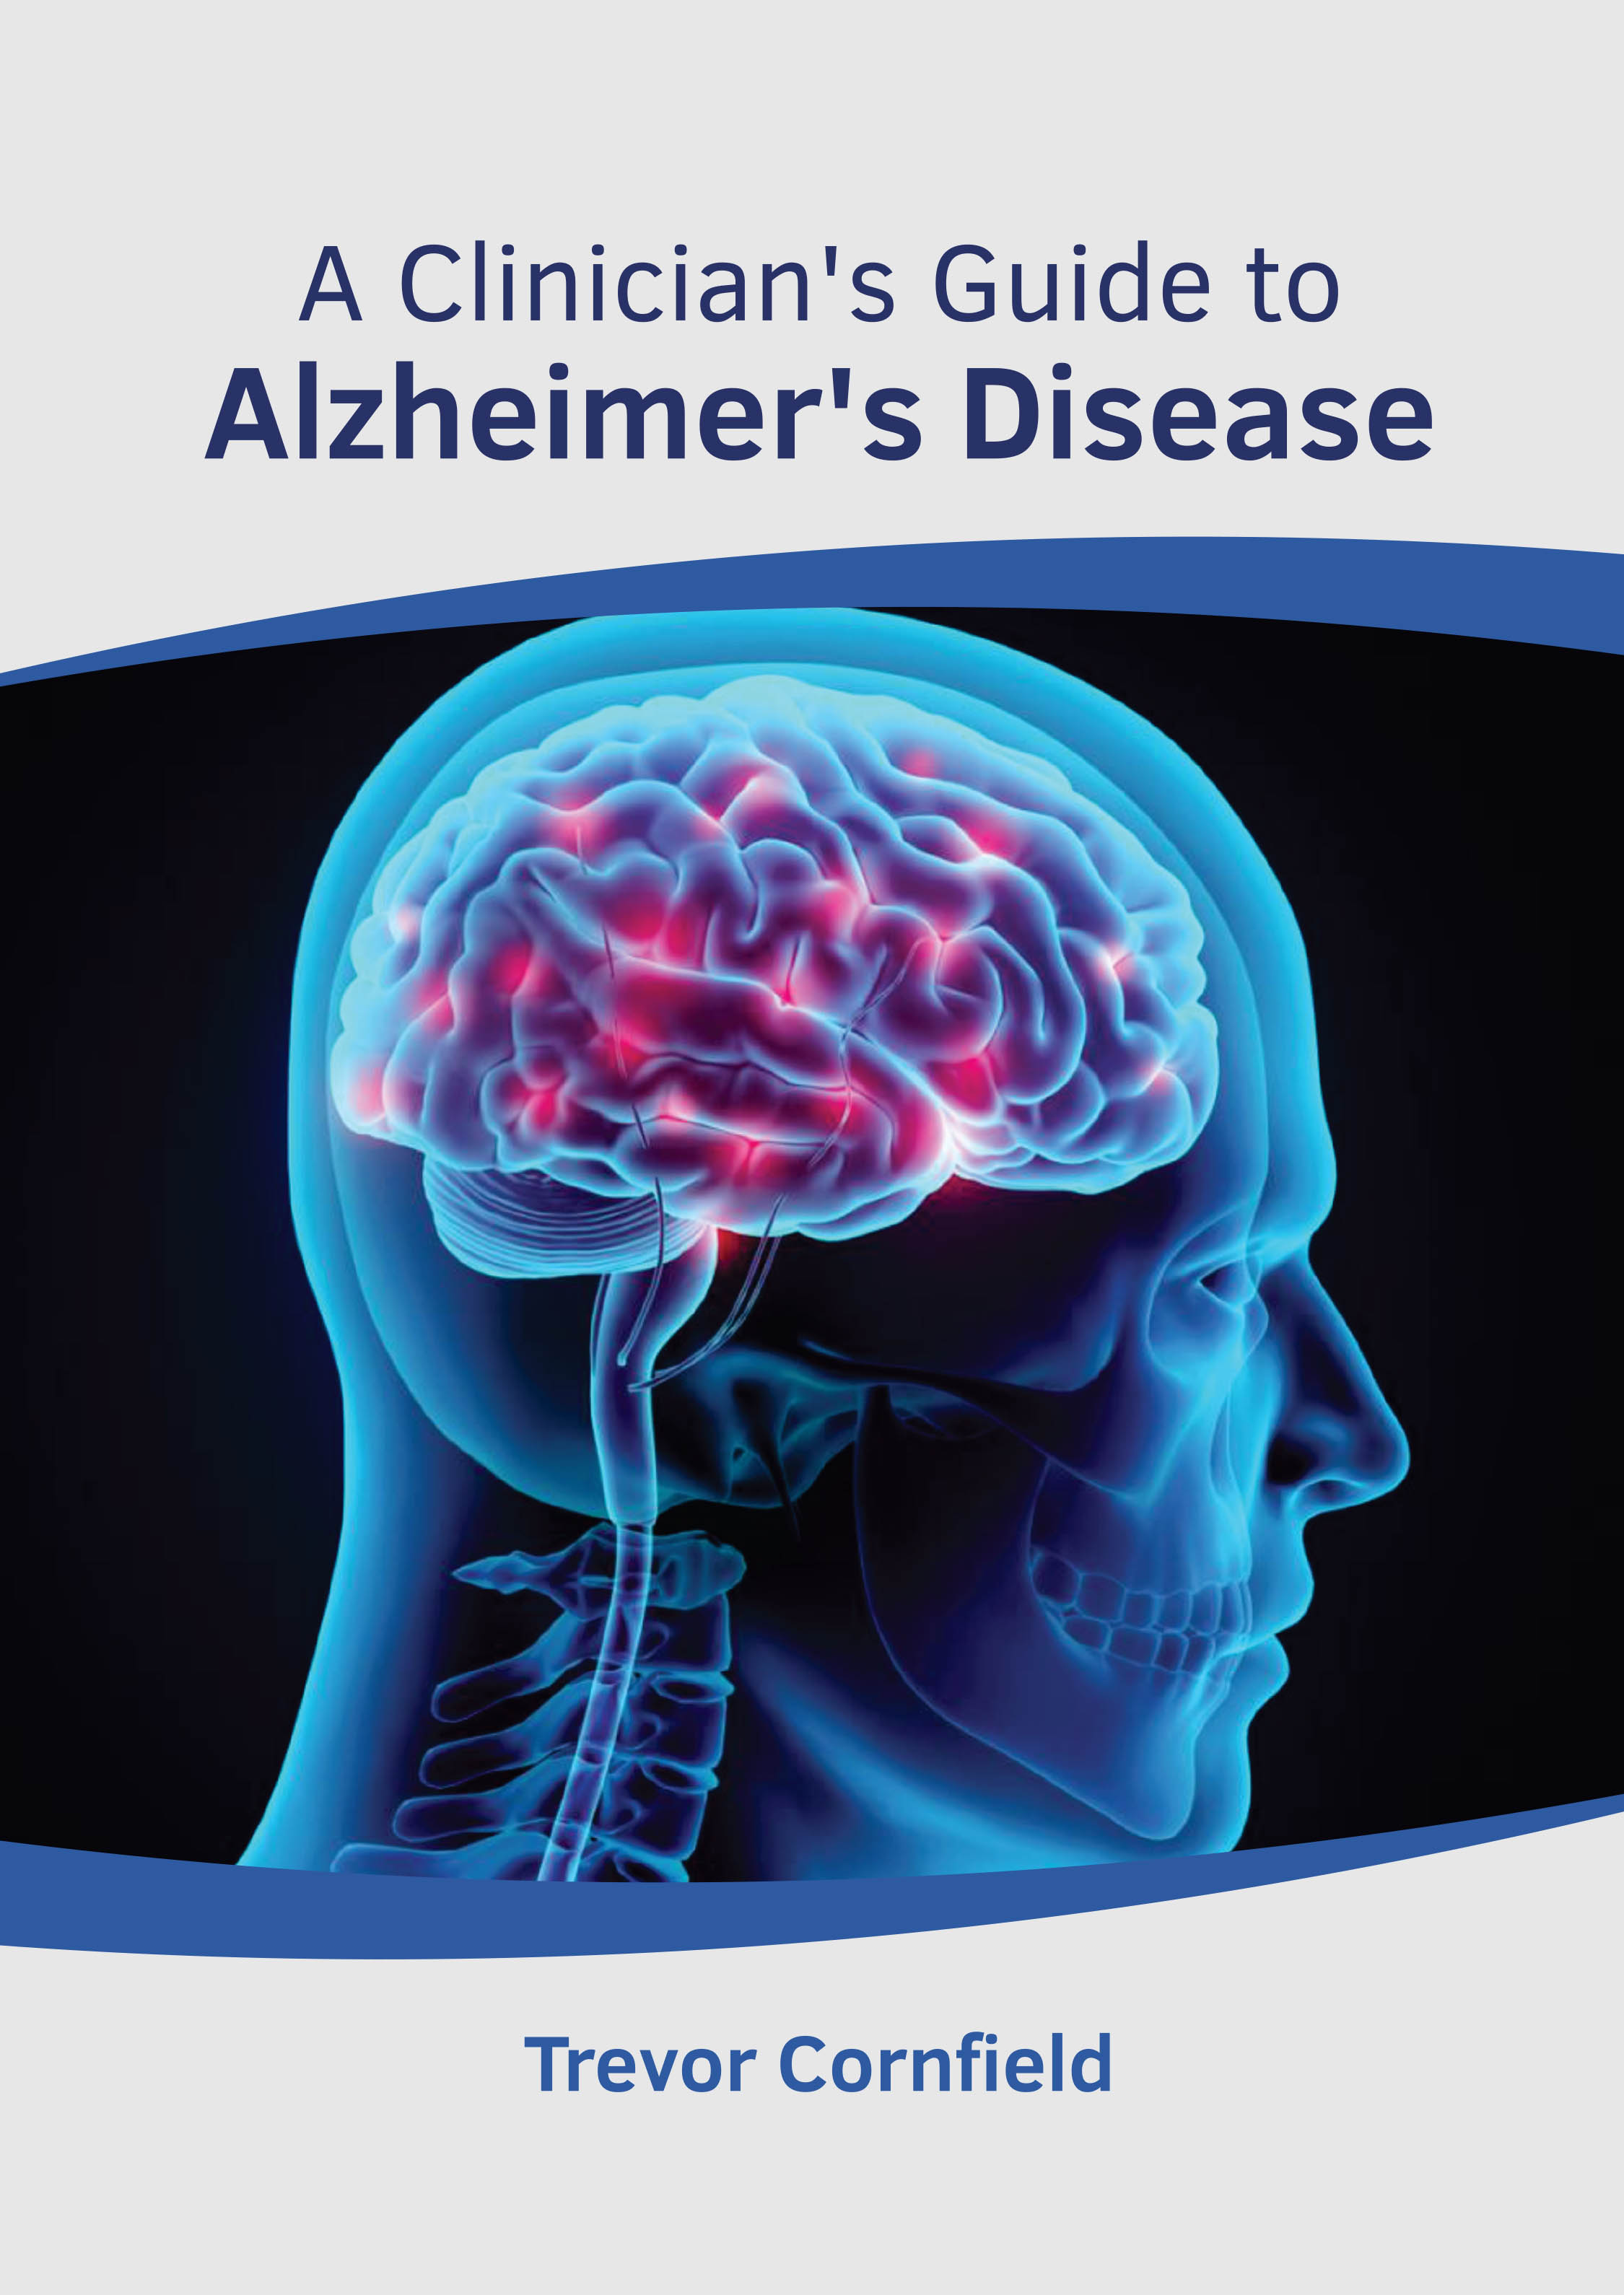 

medical-reference-books/psychiatry/a-clinician-s-guide-to-alzheimer-s-disease-9781639274321